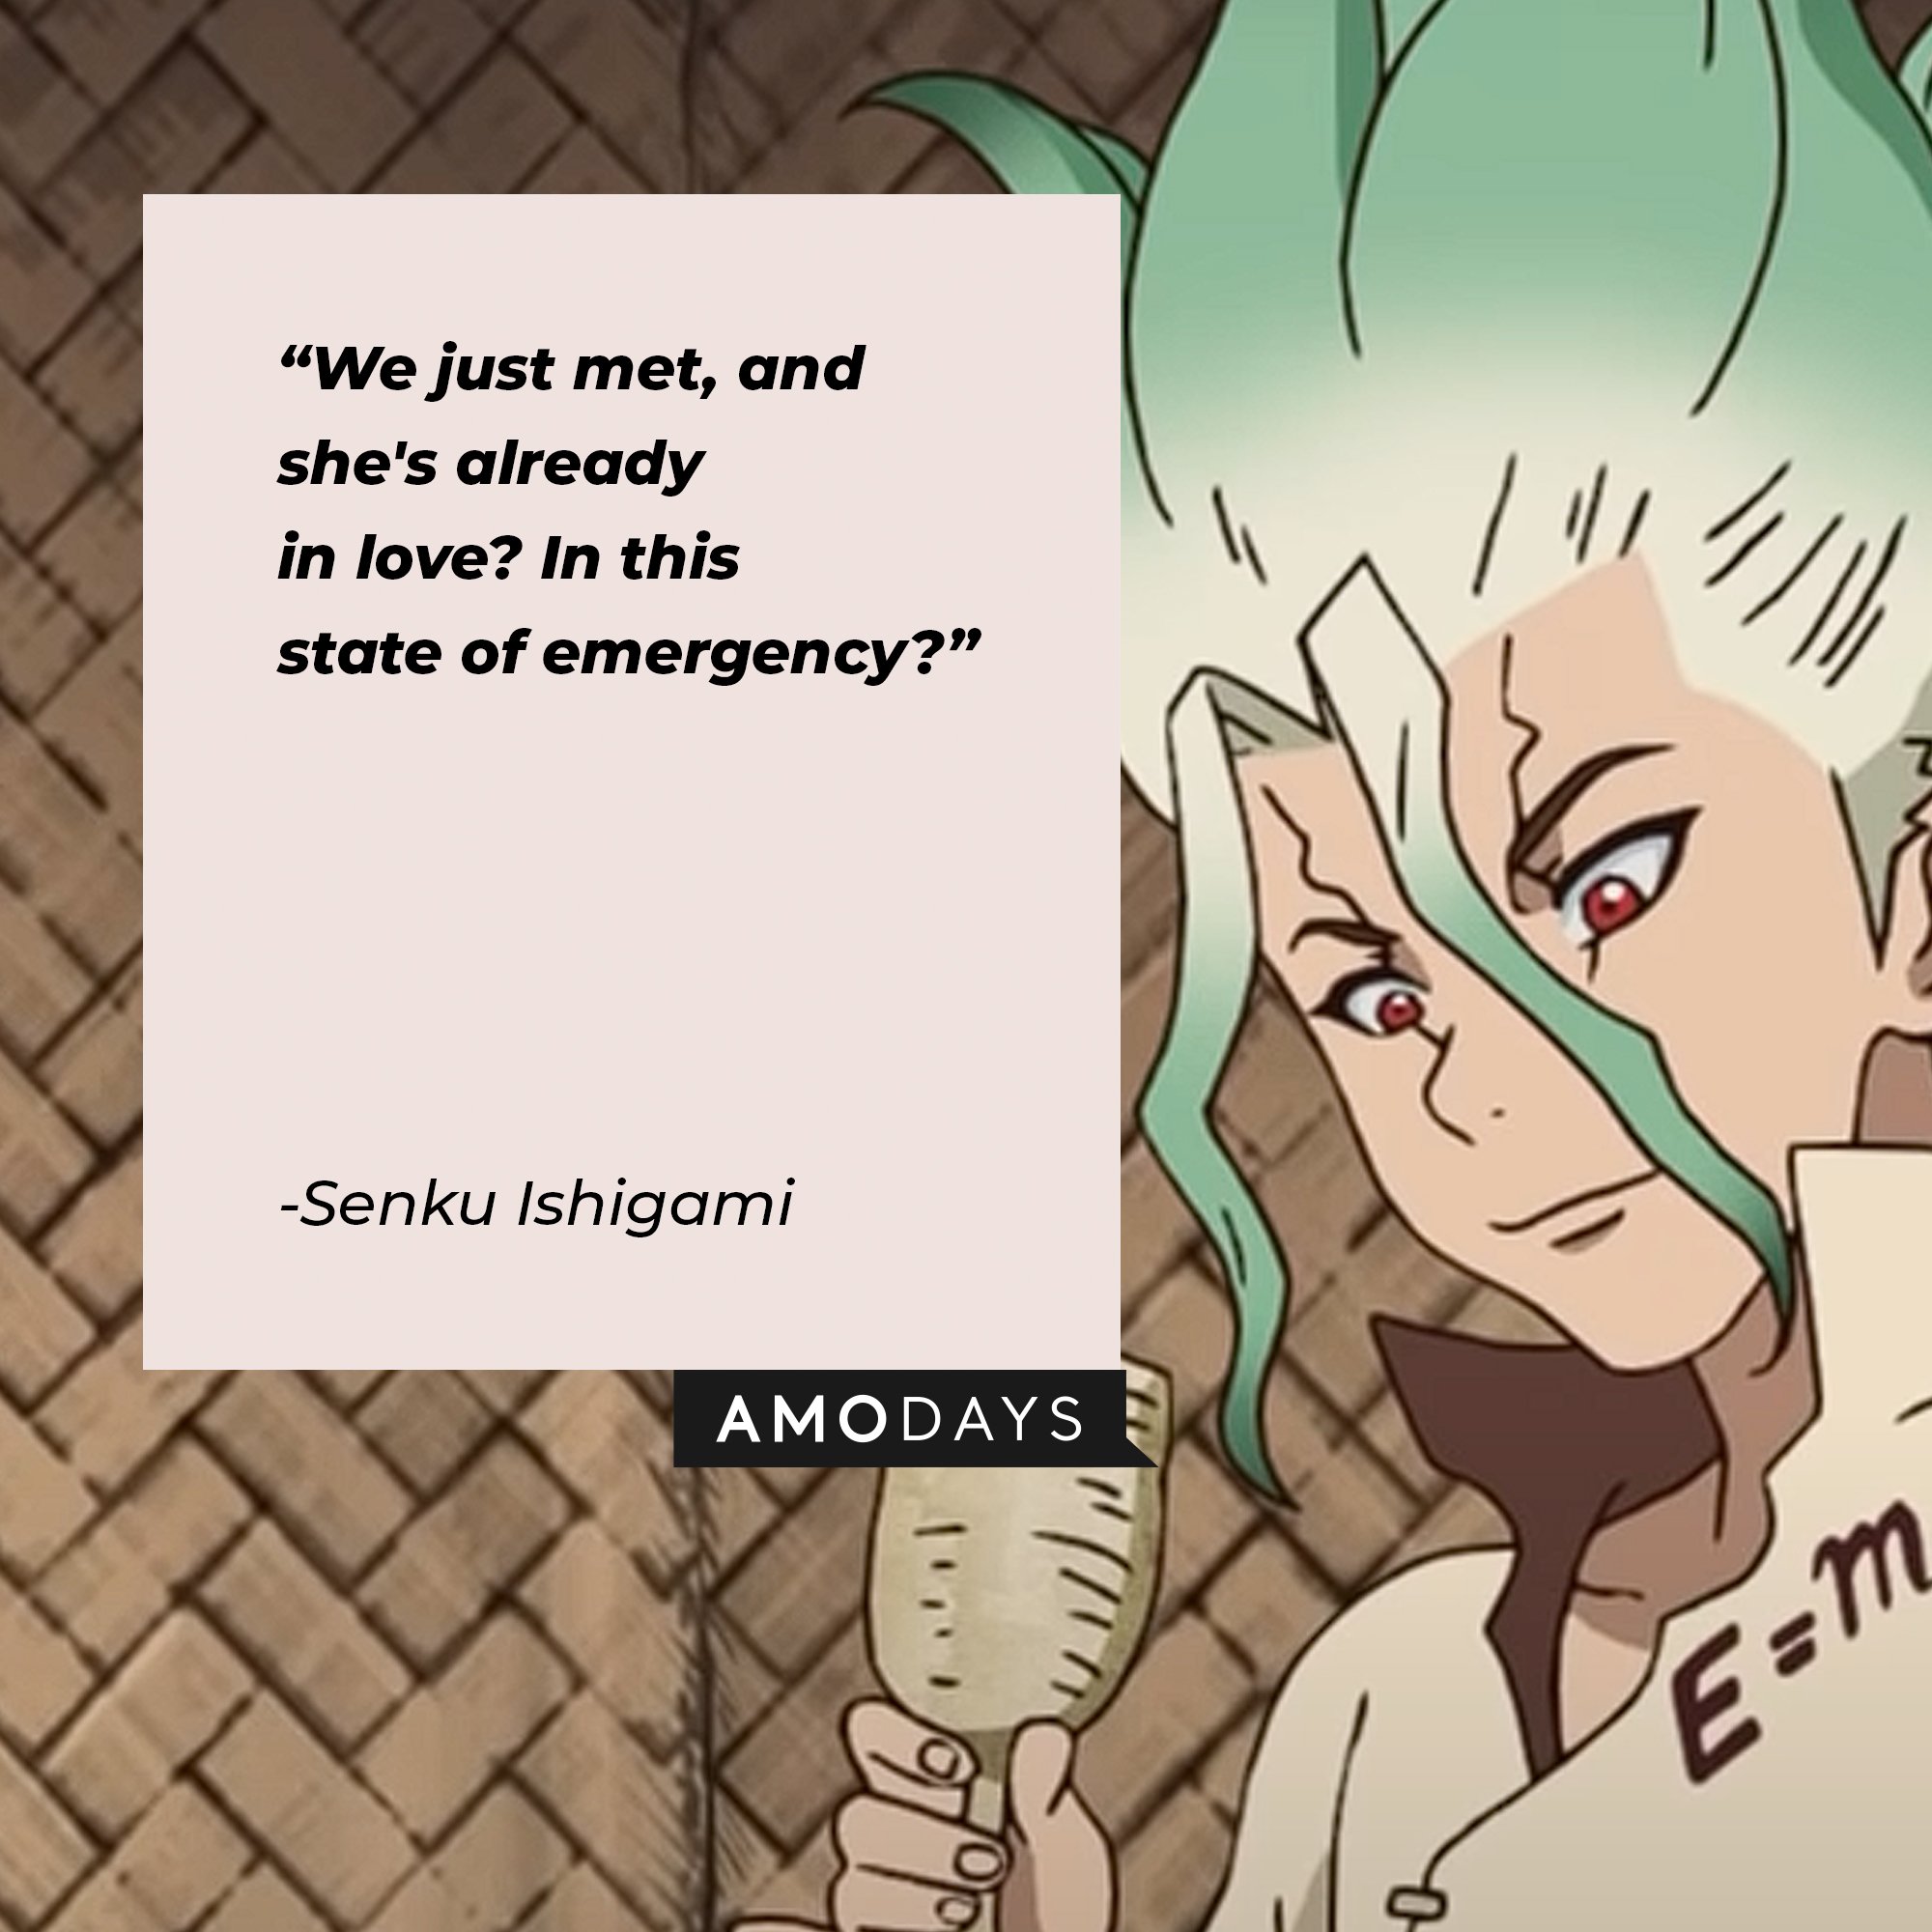 Senku Ishigami’s quote: "We just met, and she's already in love? In this state of emergency?" | Image: AmoDays